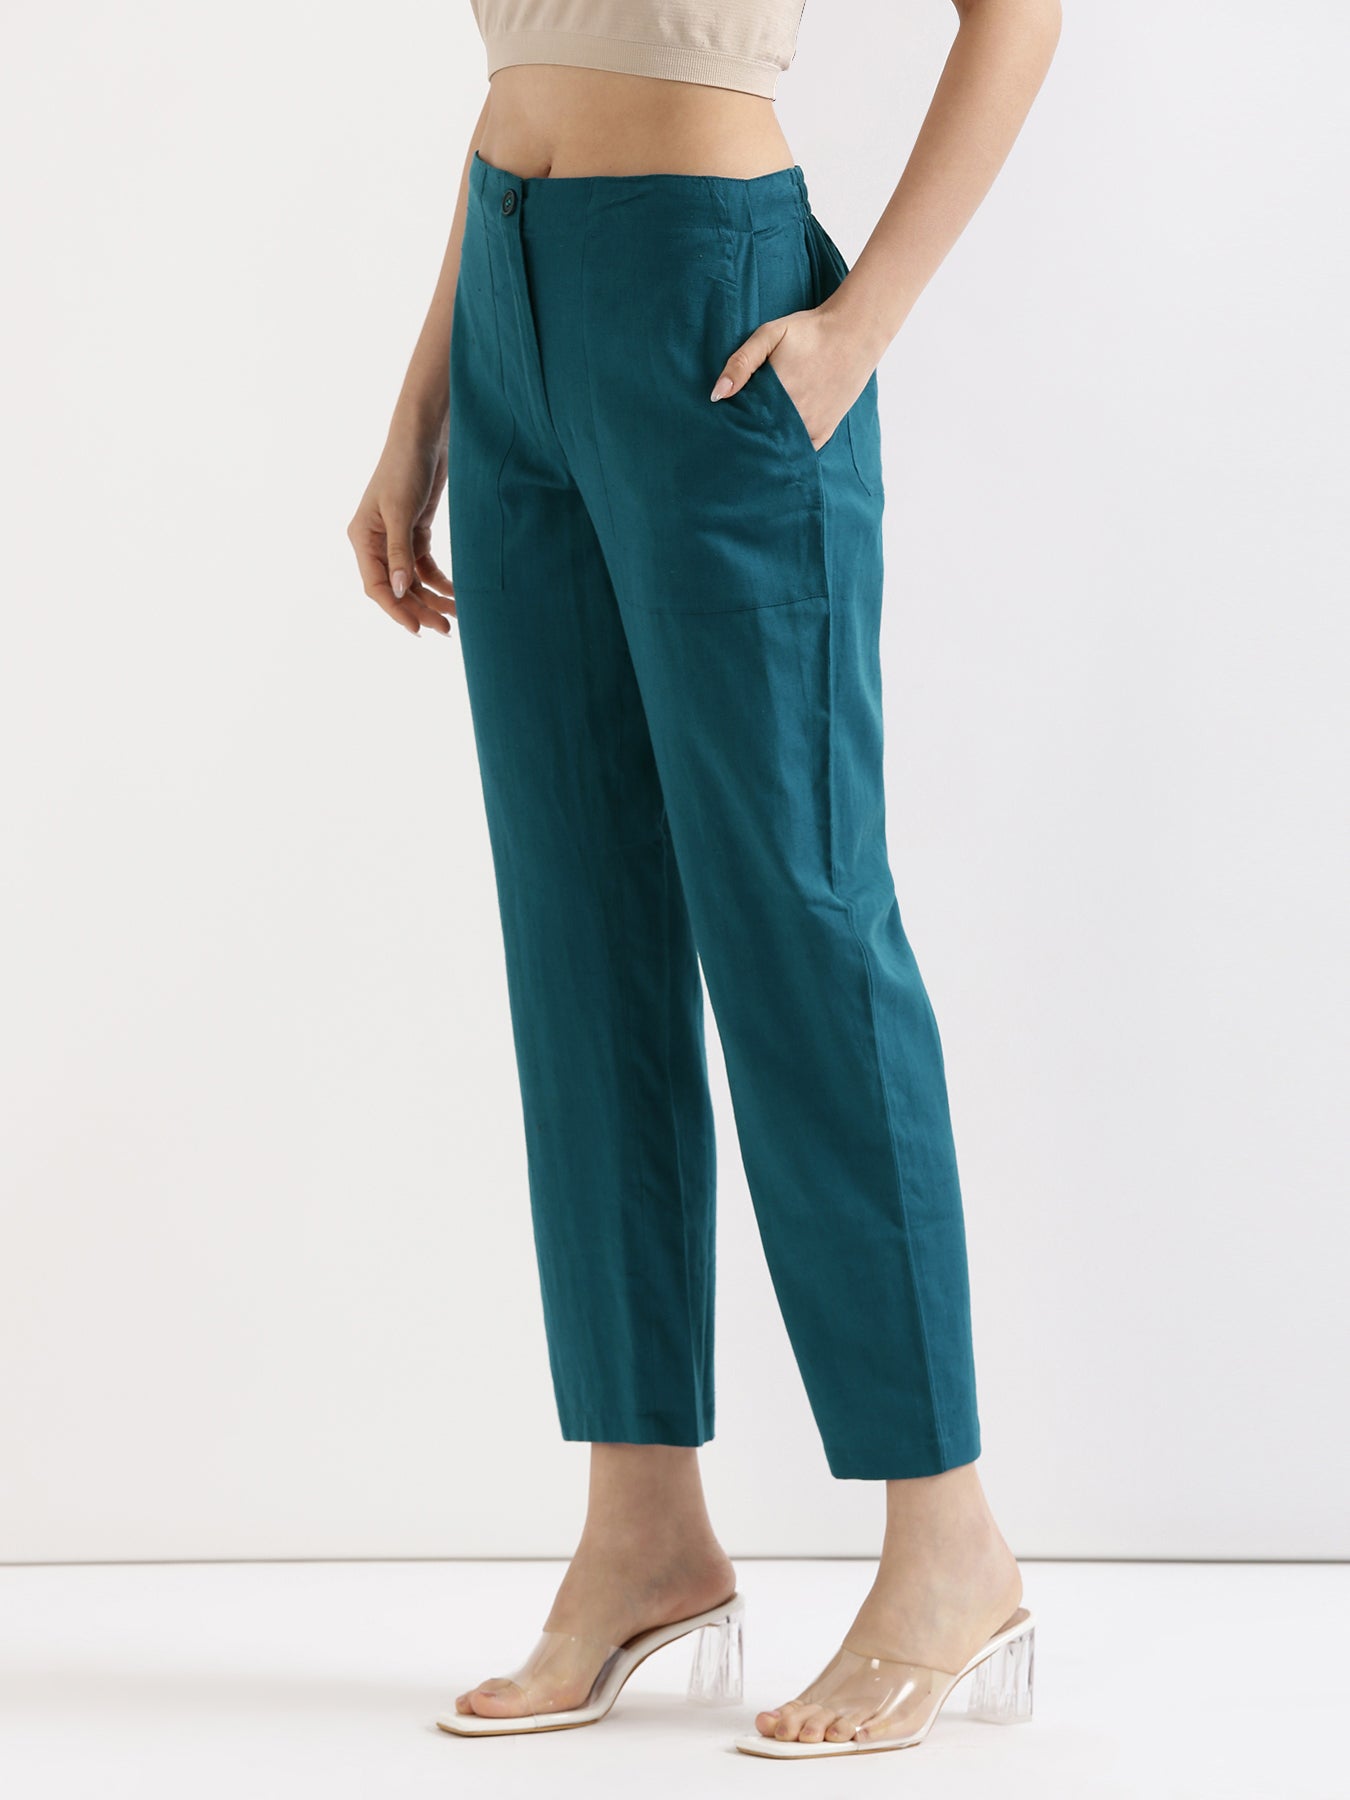 Turquoise Airy Linen Pants